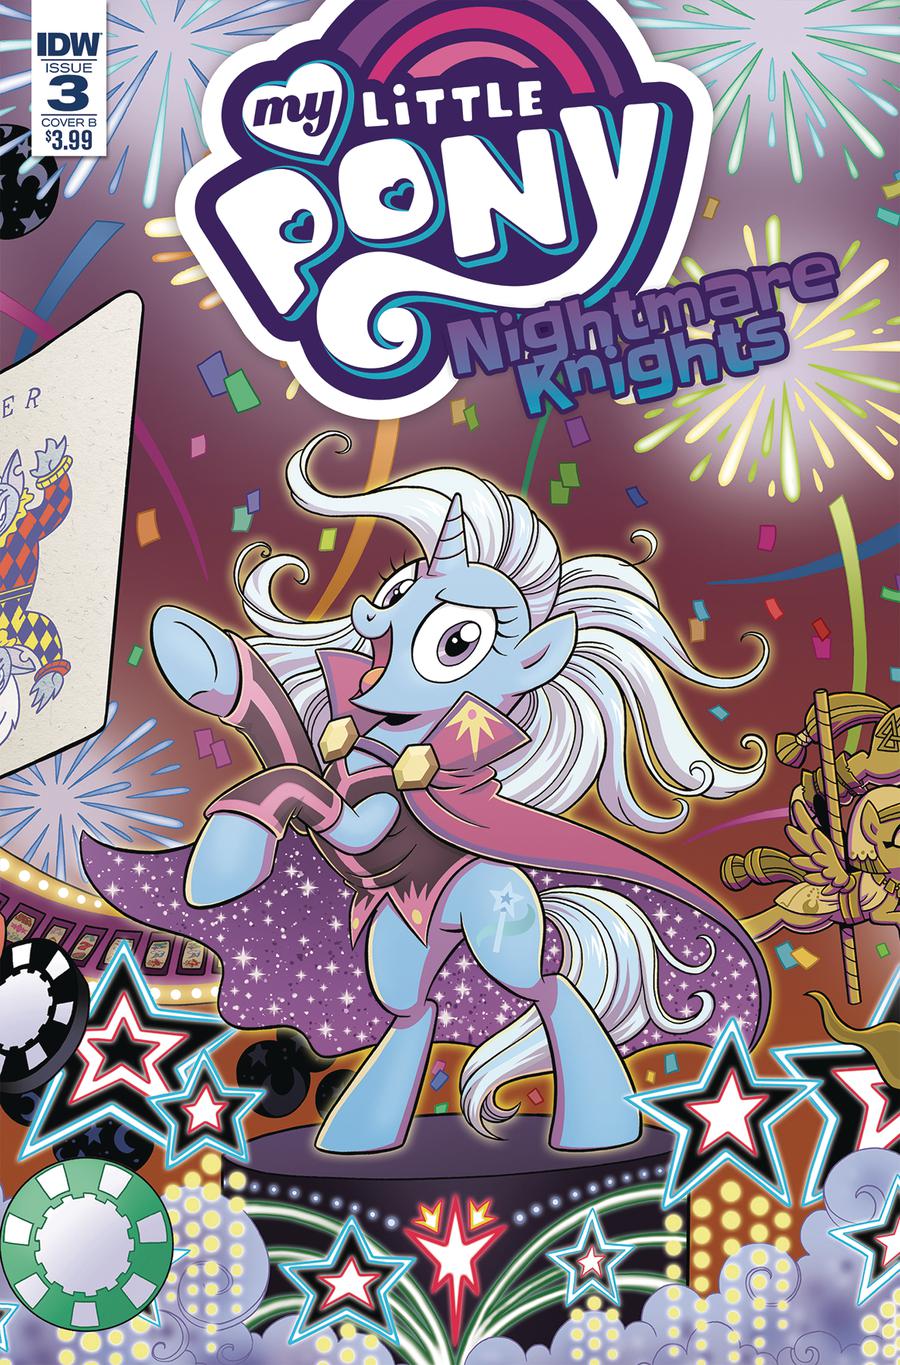 My Little Pony Nightmare Knights #3 Cover B Variant Brenda Hickey Cover